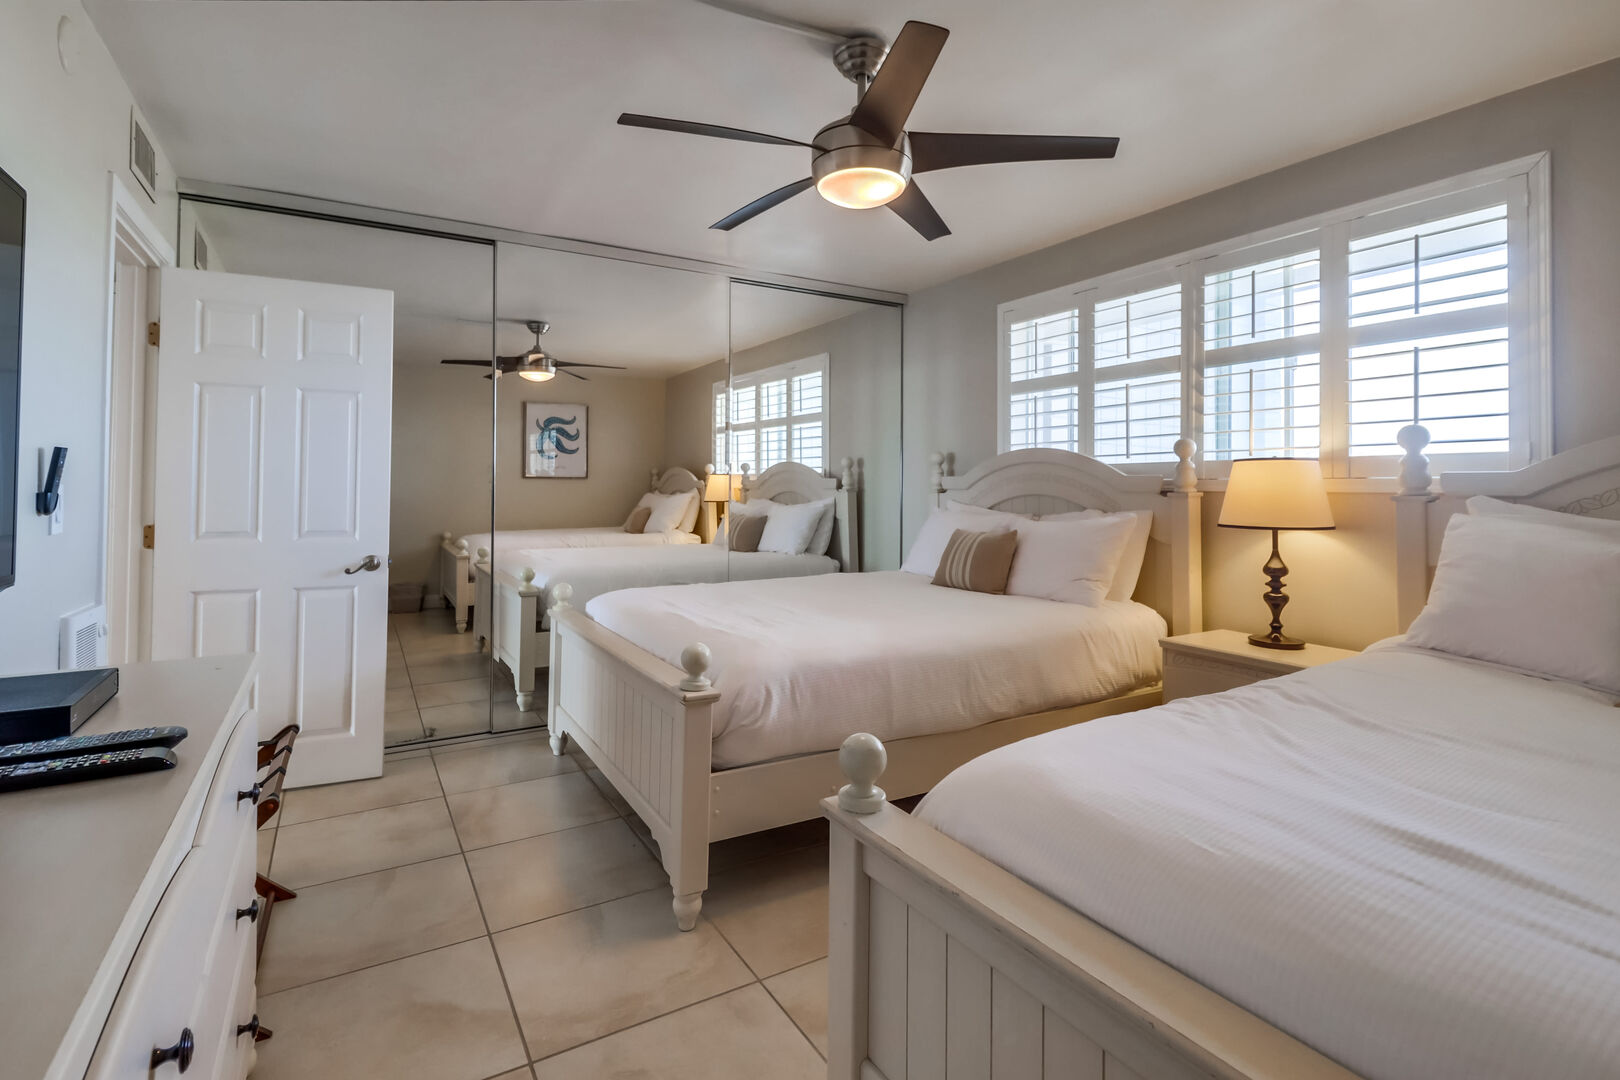 Clean and minimalist bedroom with 2 queen beds, ceiling fan, wall heater, dresser storage, luggage racks, large mirrored closet and smart TV with streaming capabilities